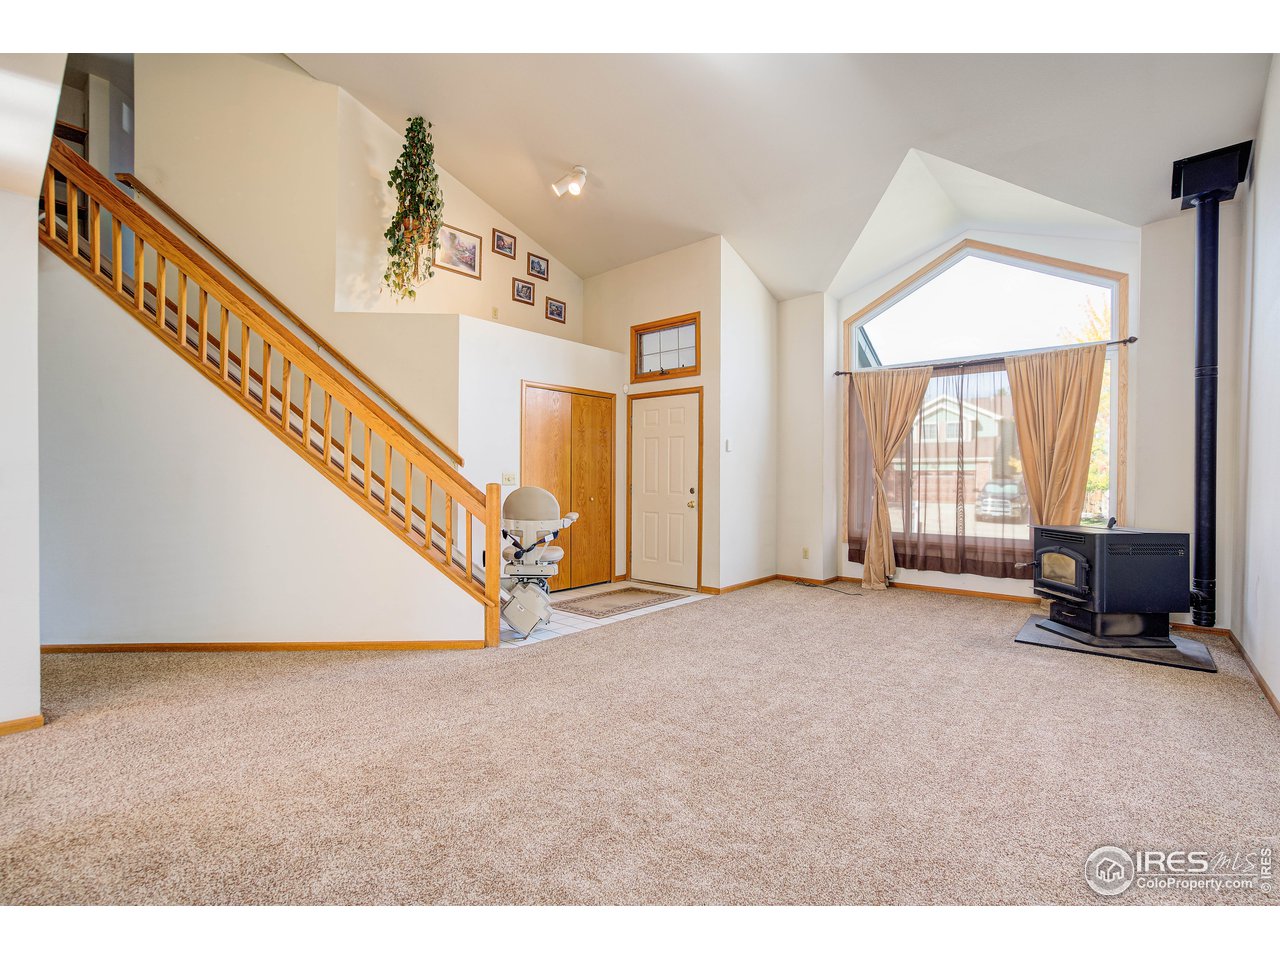 Walking through the front door, be sure to note the large windows, pellet stove, vaulted ceilings, & new carpet & pad. 